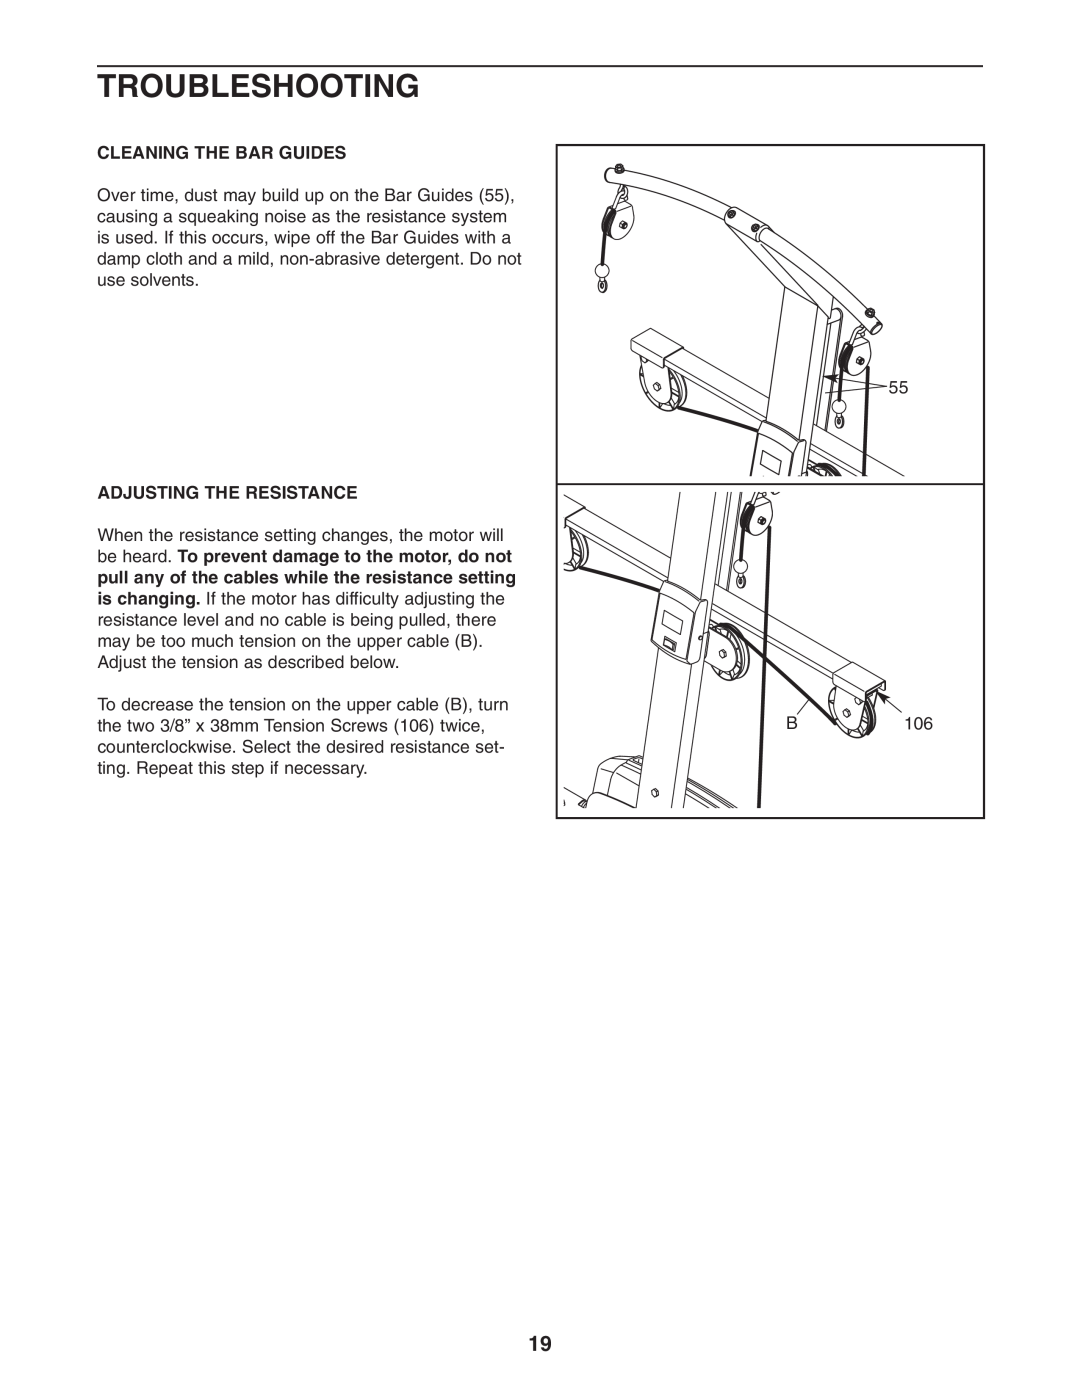 Weider WESY68632 user manual Troubleshooting, Cleaning The Bar Guides, Adjusting The Resistance 